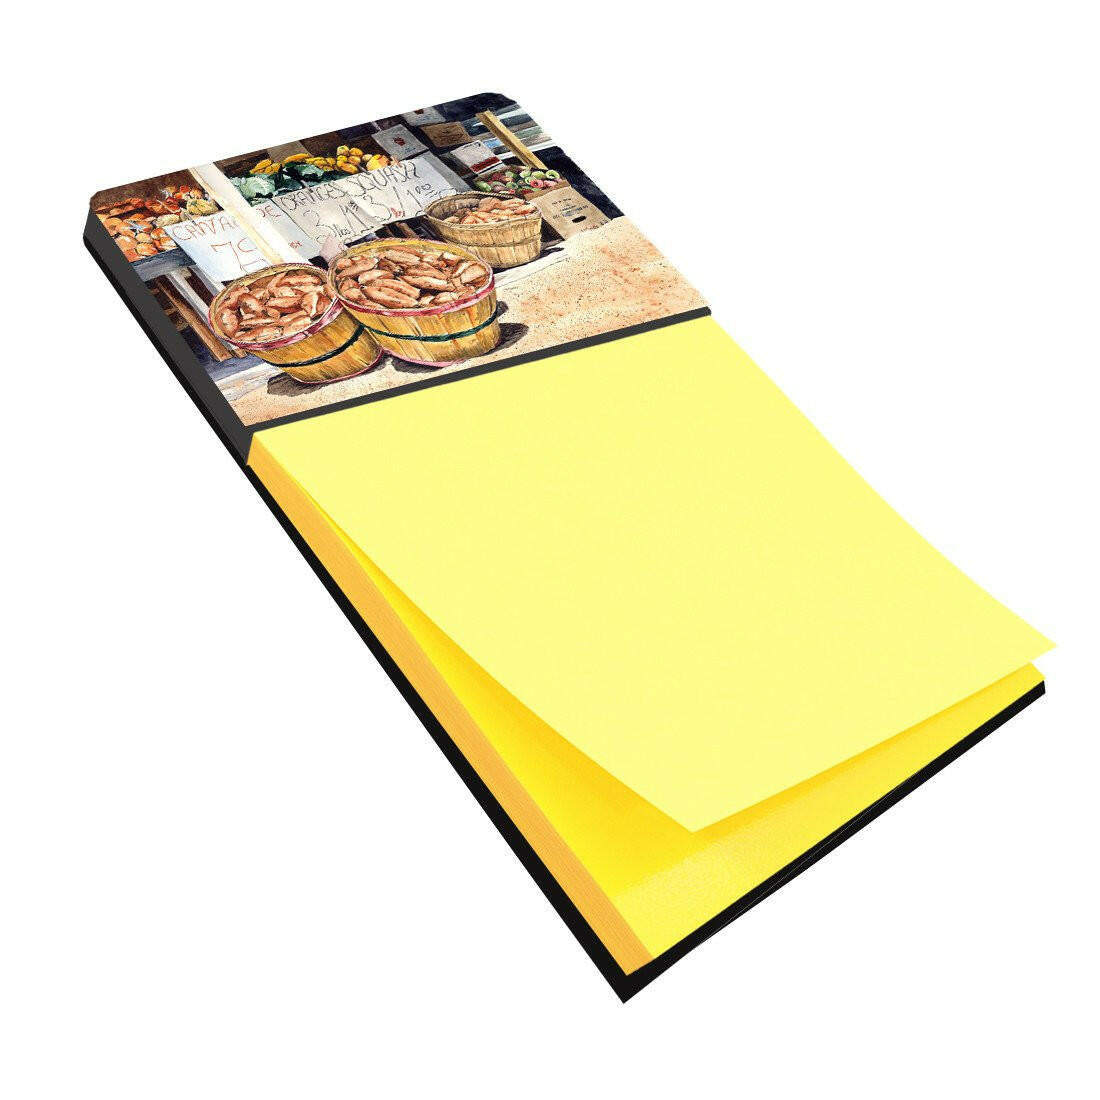 Crawfish with Spices and Corn Sticky Note Holder 8699SN by Caroline's Treasures